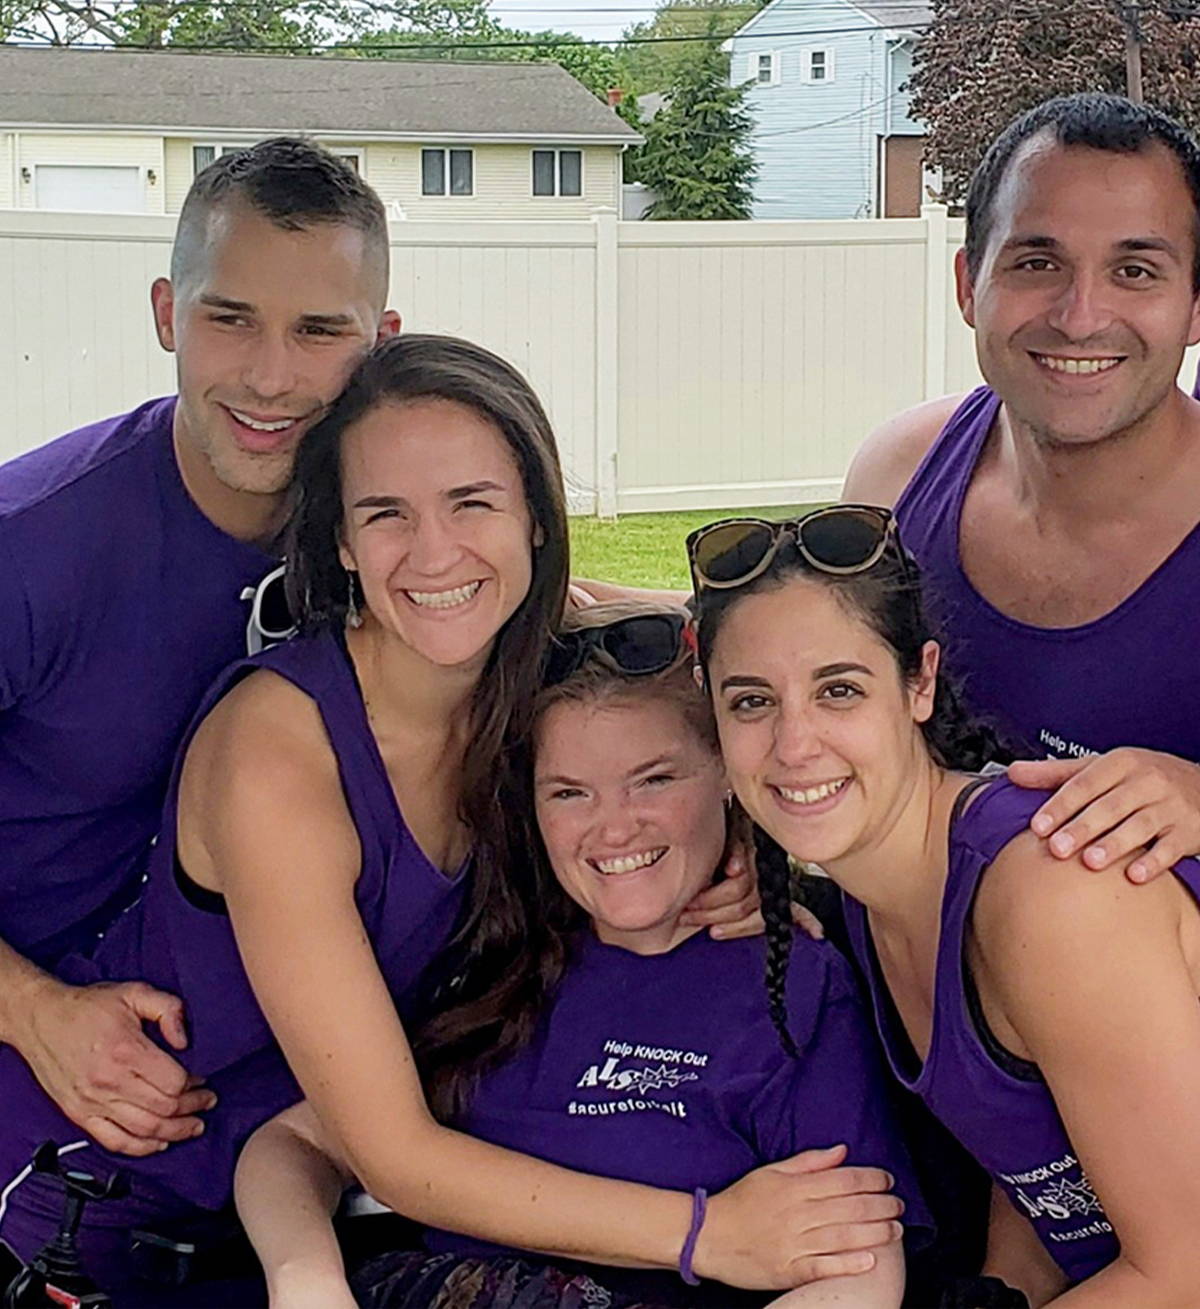 A young woman with ALS and her friends huddled together in matching purple t-shirts. 